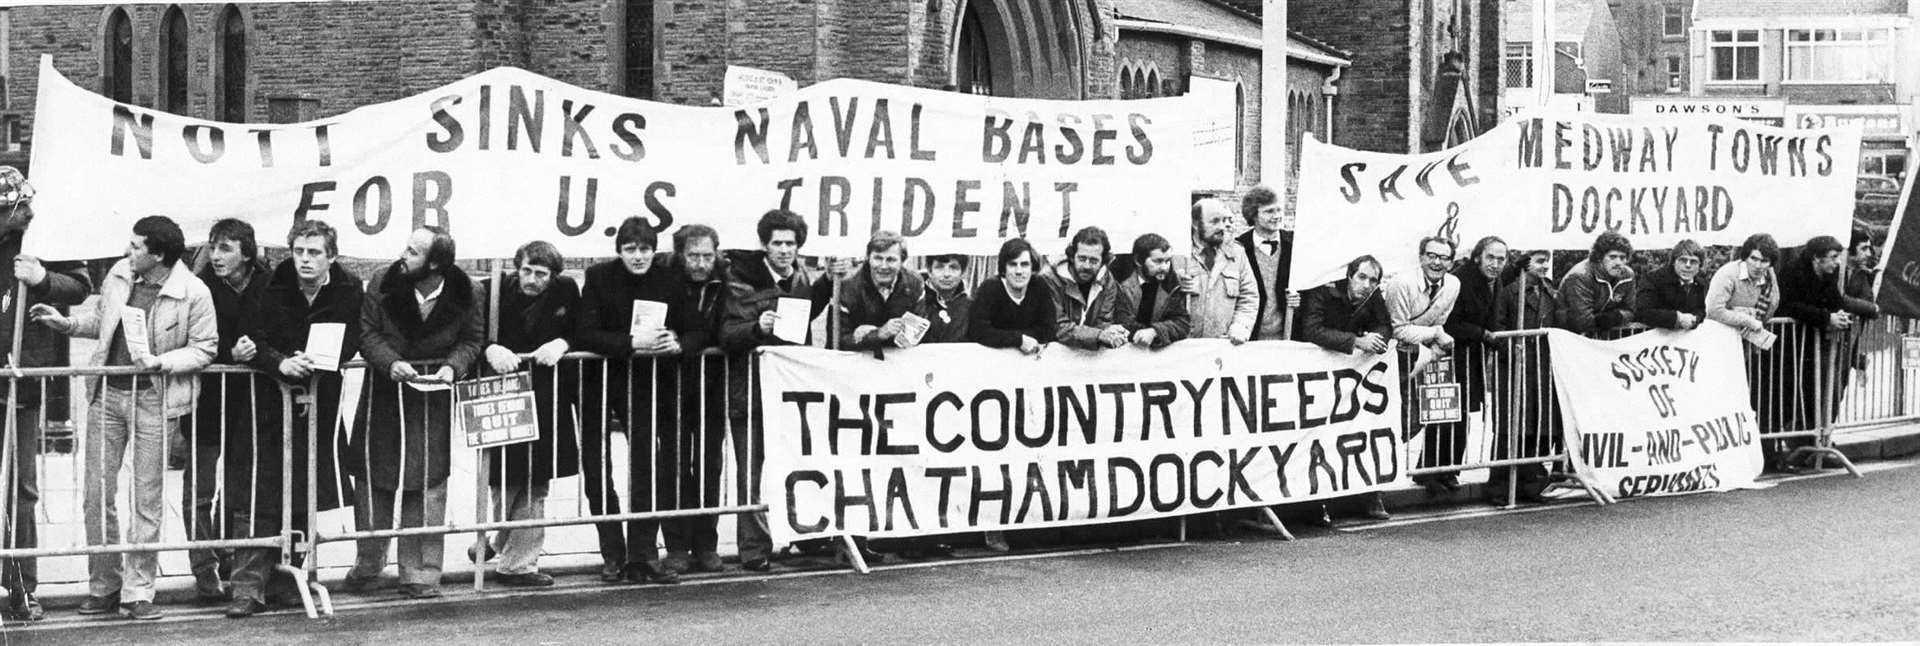 Chatham Dockyard, Yard Closure protesters get their message across on the route for delegates attending the Tory Party conference in Blackpool, October 15 1981